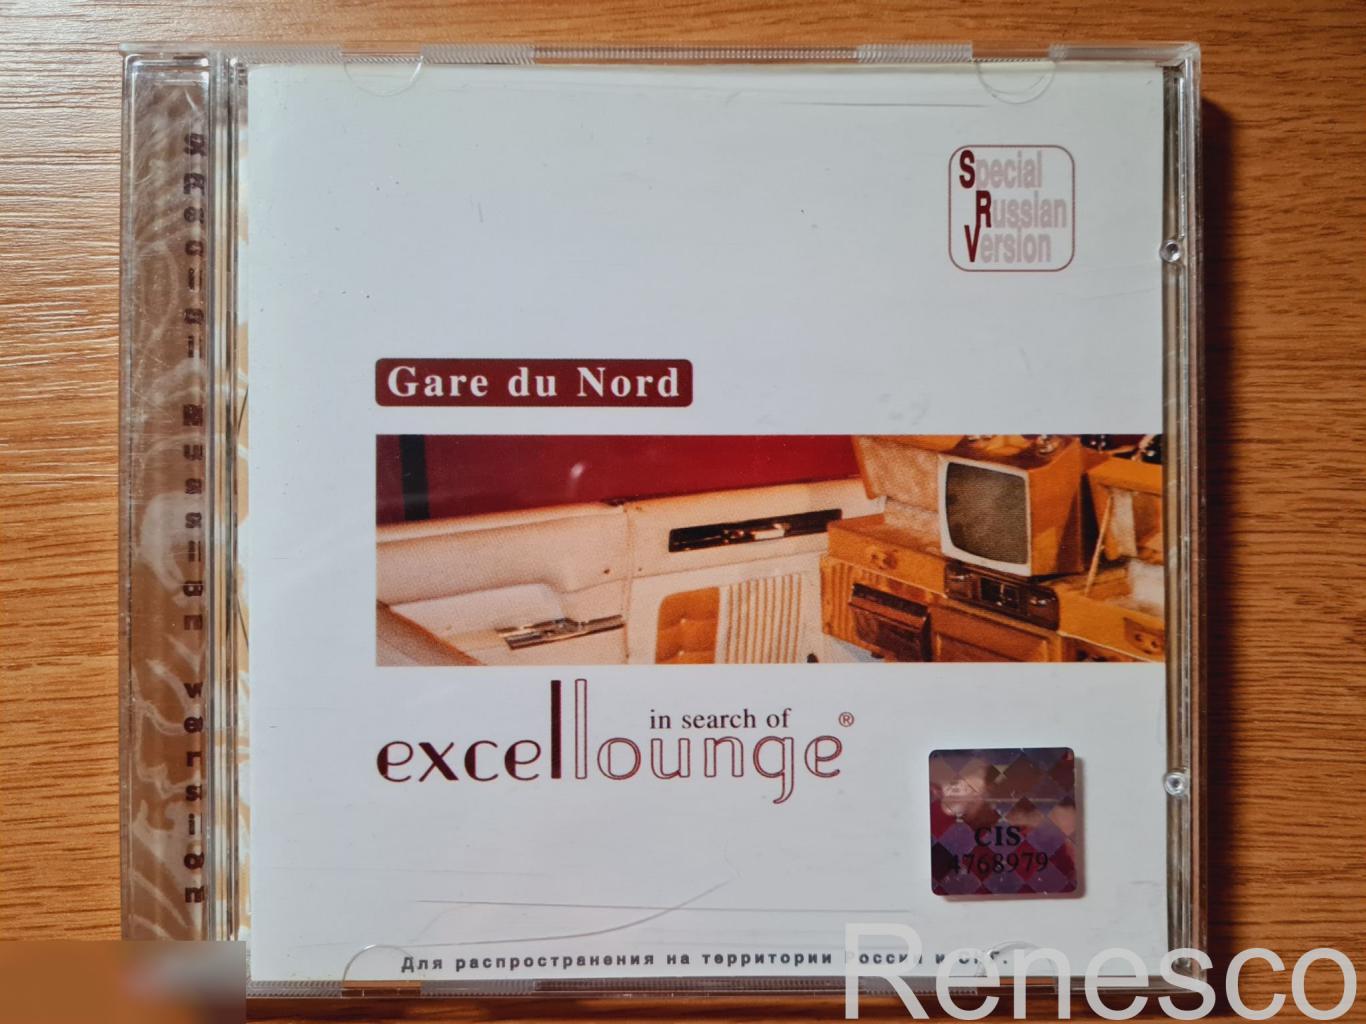 Gare Du Nord – In Search Of Excellounge (Russia) (2001) (Special Russian Version